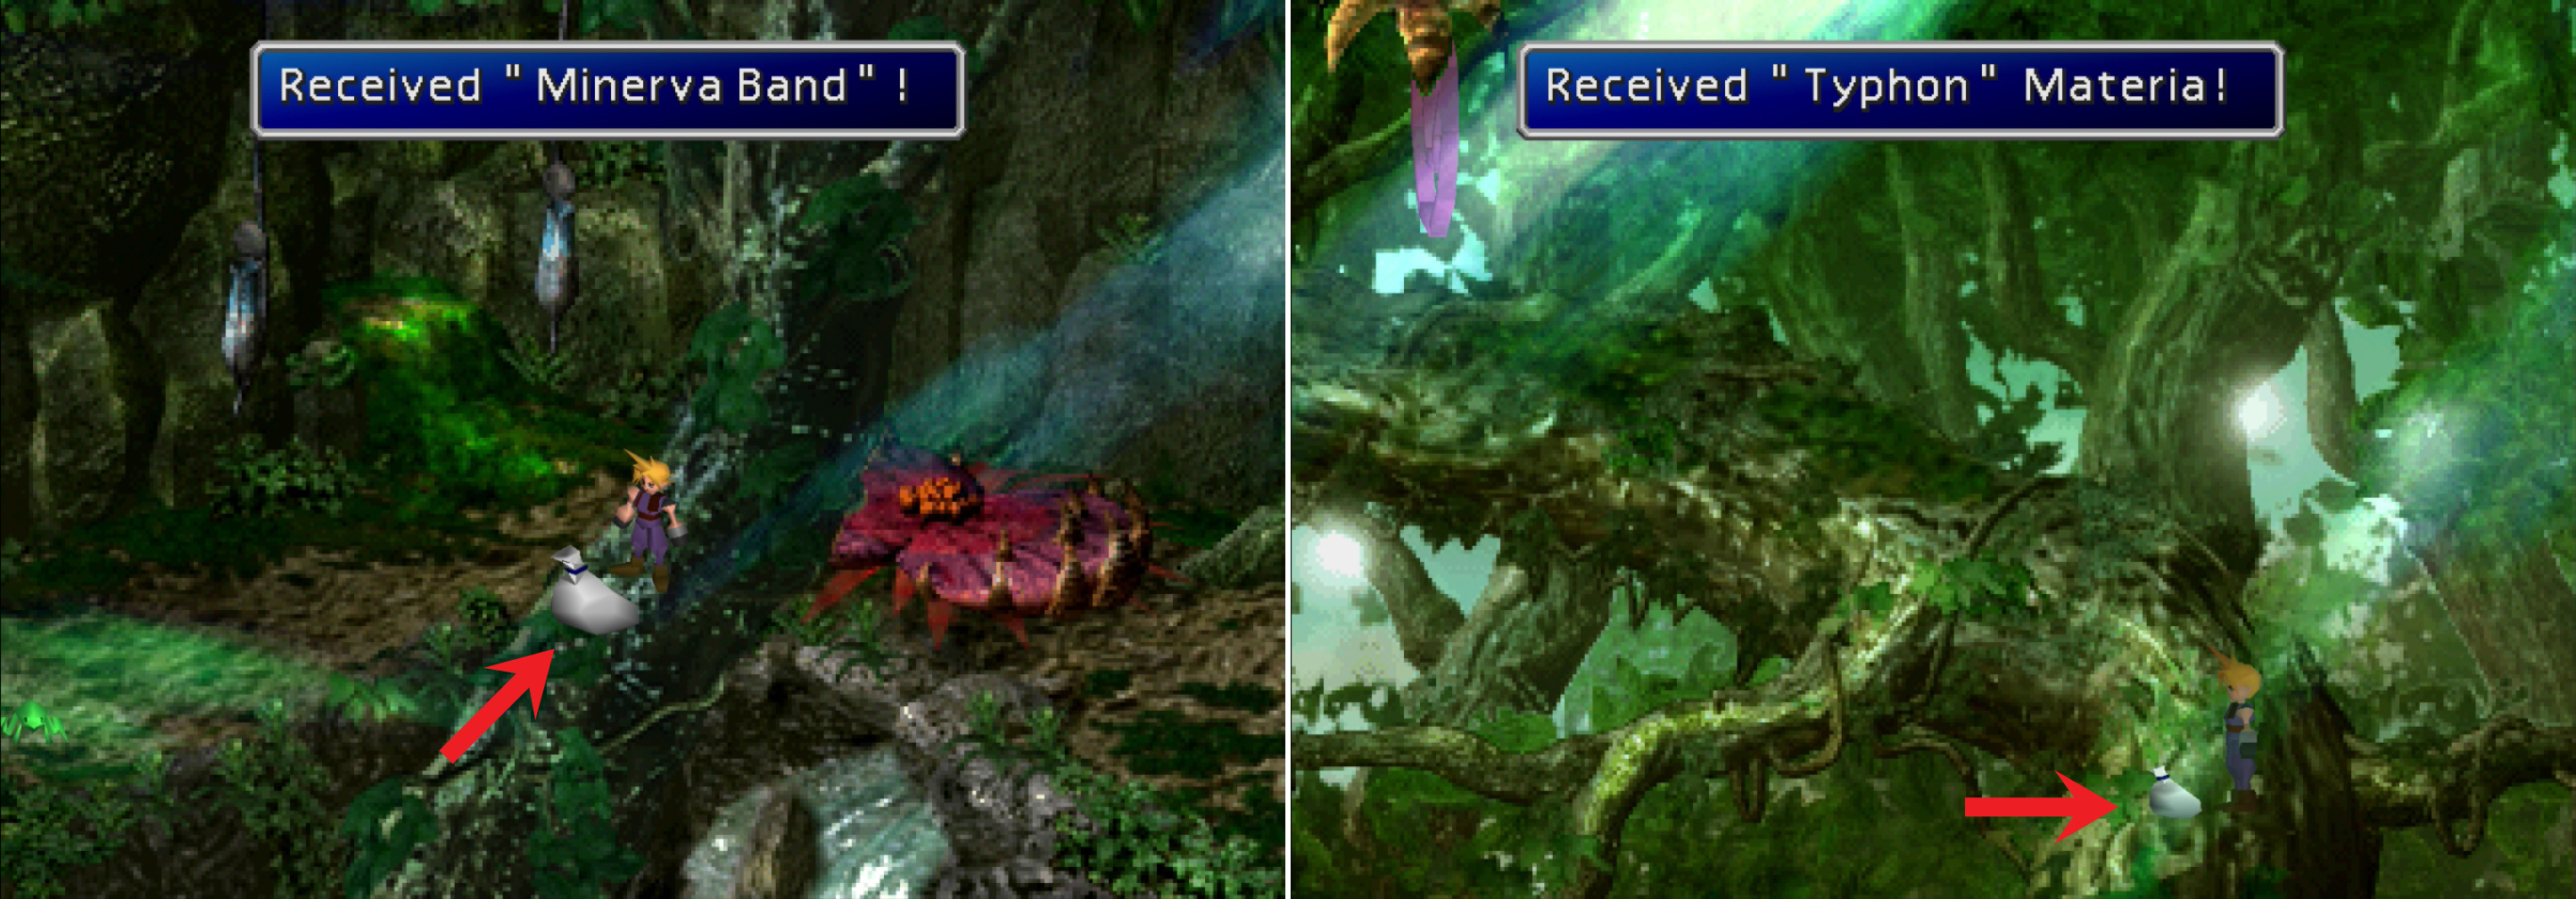 Climb down the branches of the large tree to score a Minerva Band, one of the best pieces of armor in the game (left). In the copse of the tree you can use several tongue plants to reach some Typhon Materia (right).